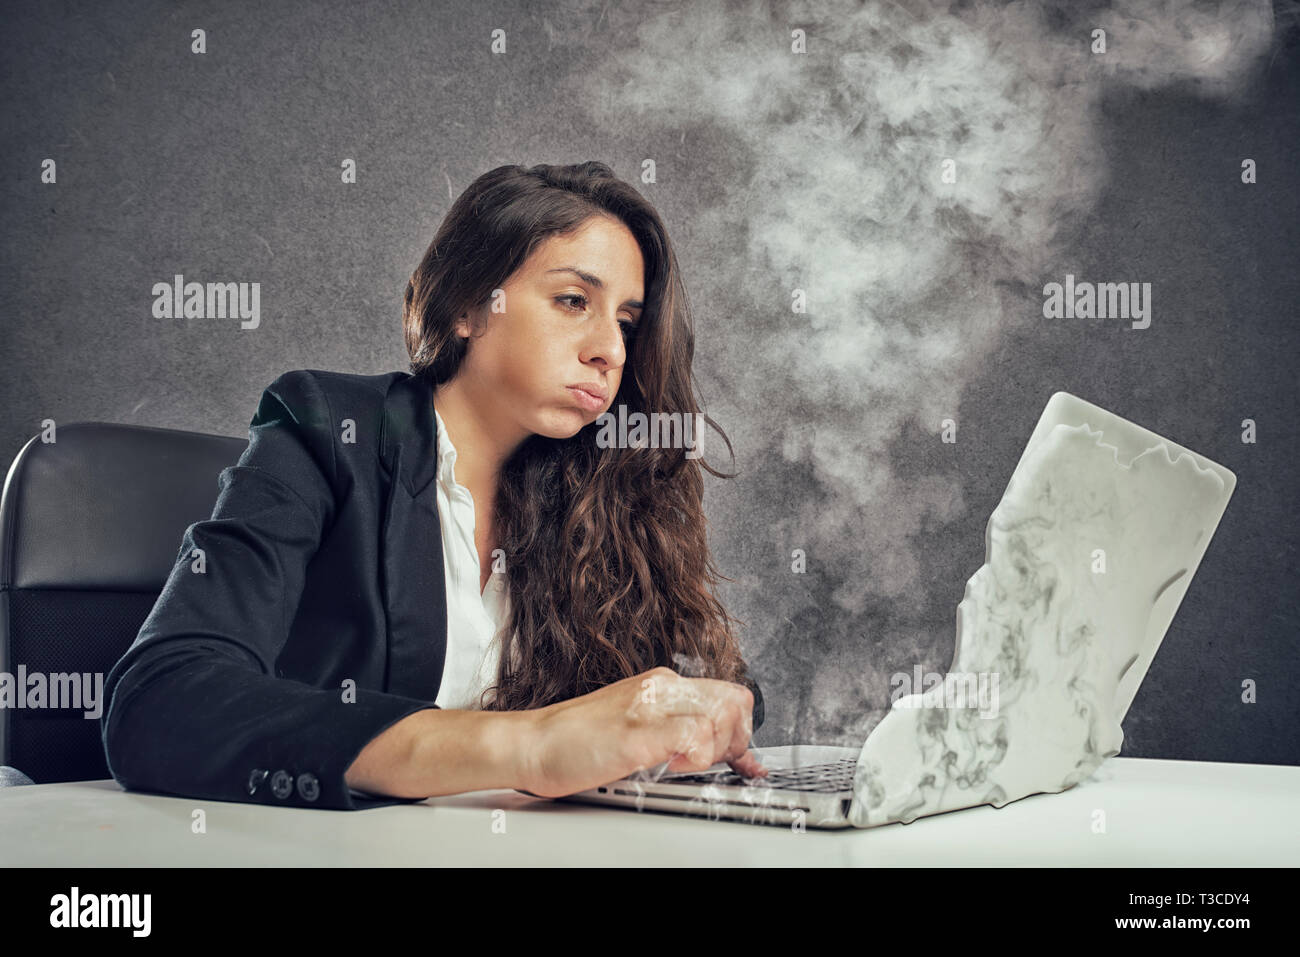 Woman stressed by overwork with the laptop melting Stock Photo